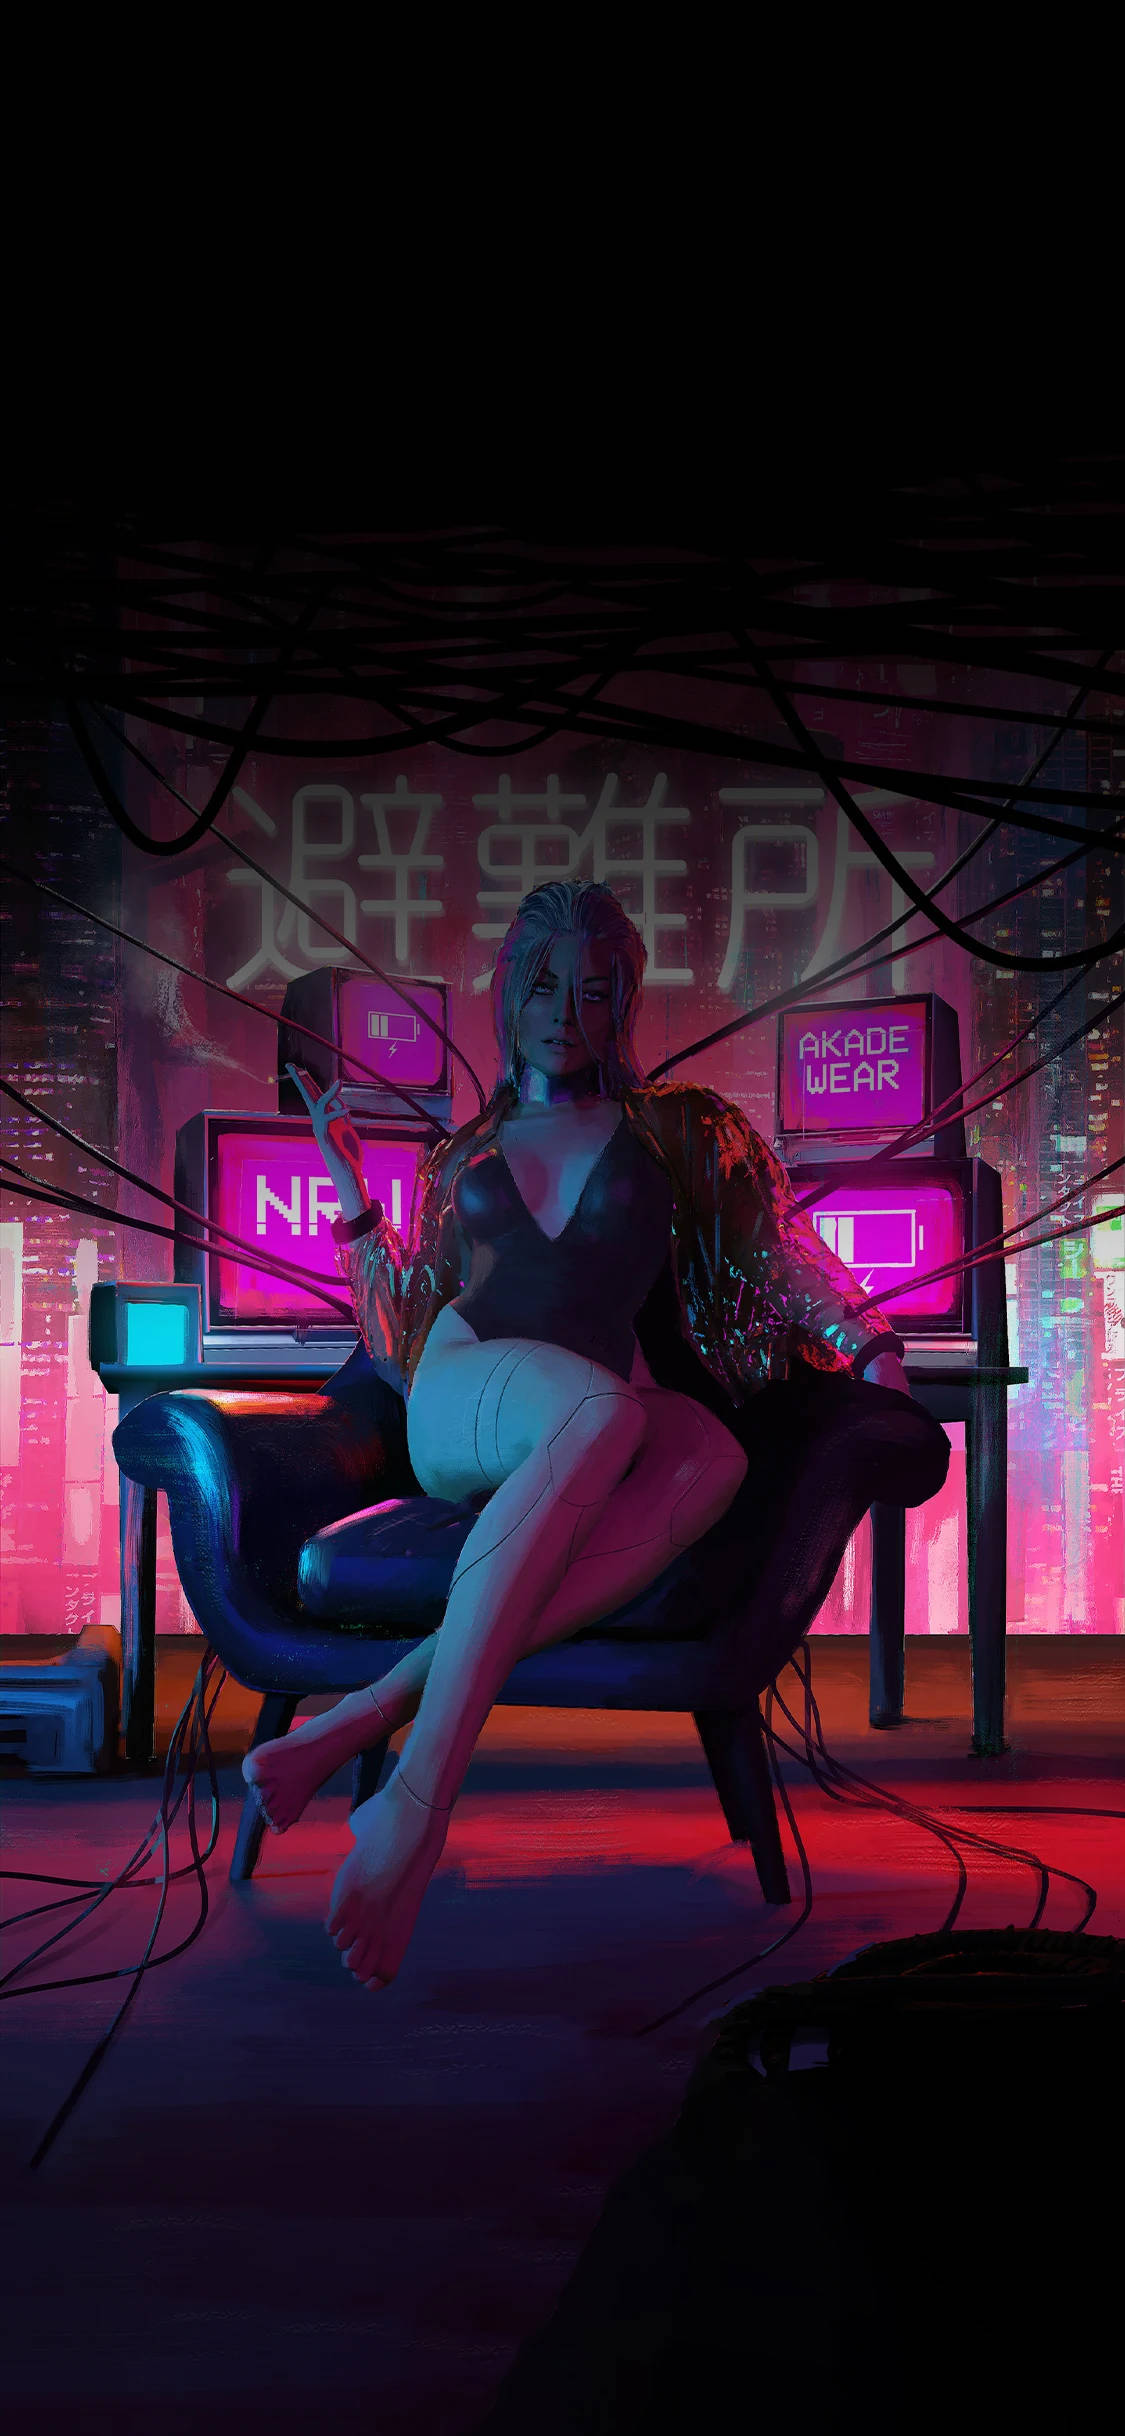 Cyberpunk Female On A Couch Iphone Background